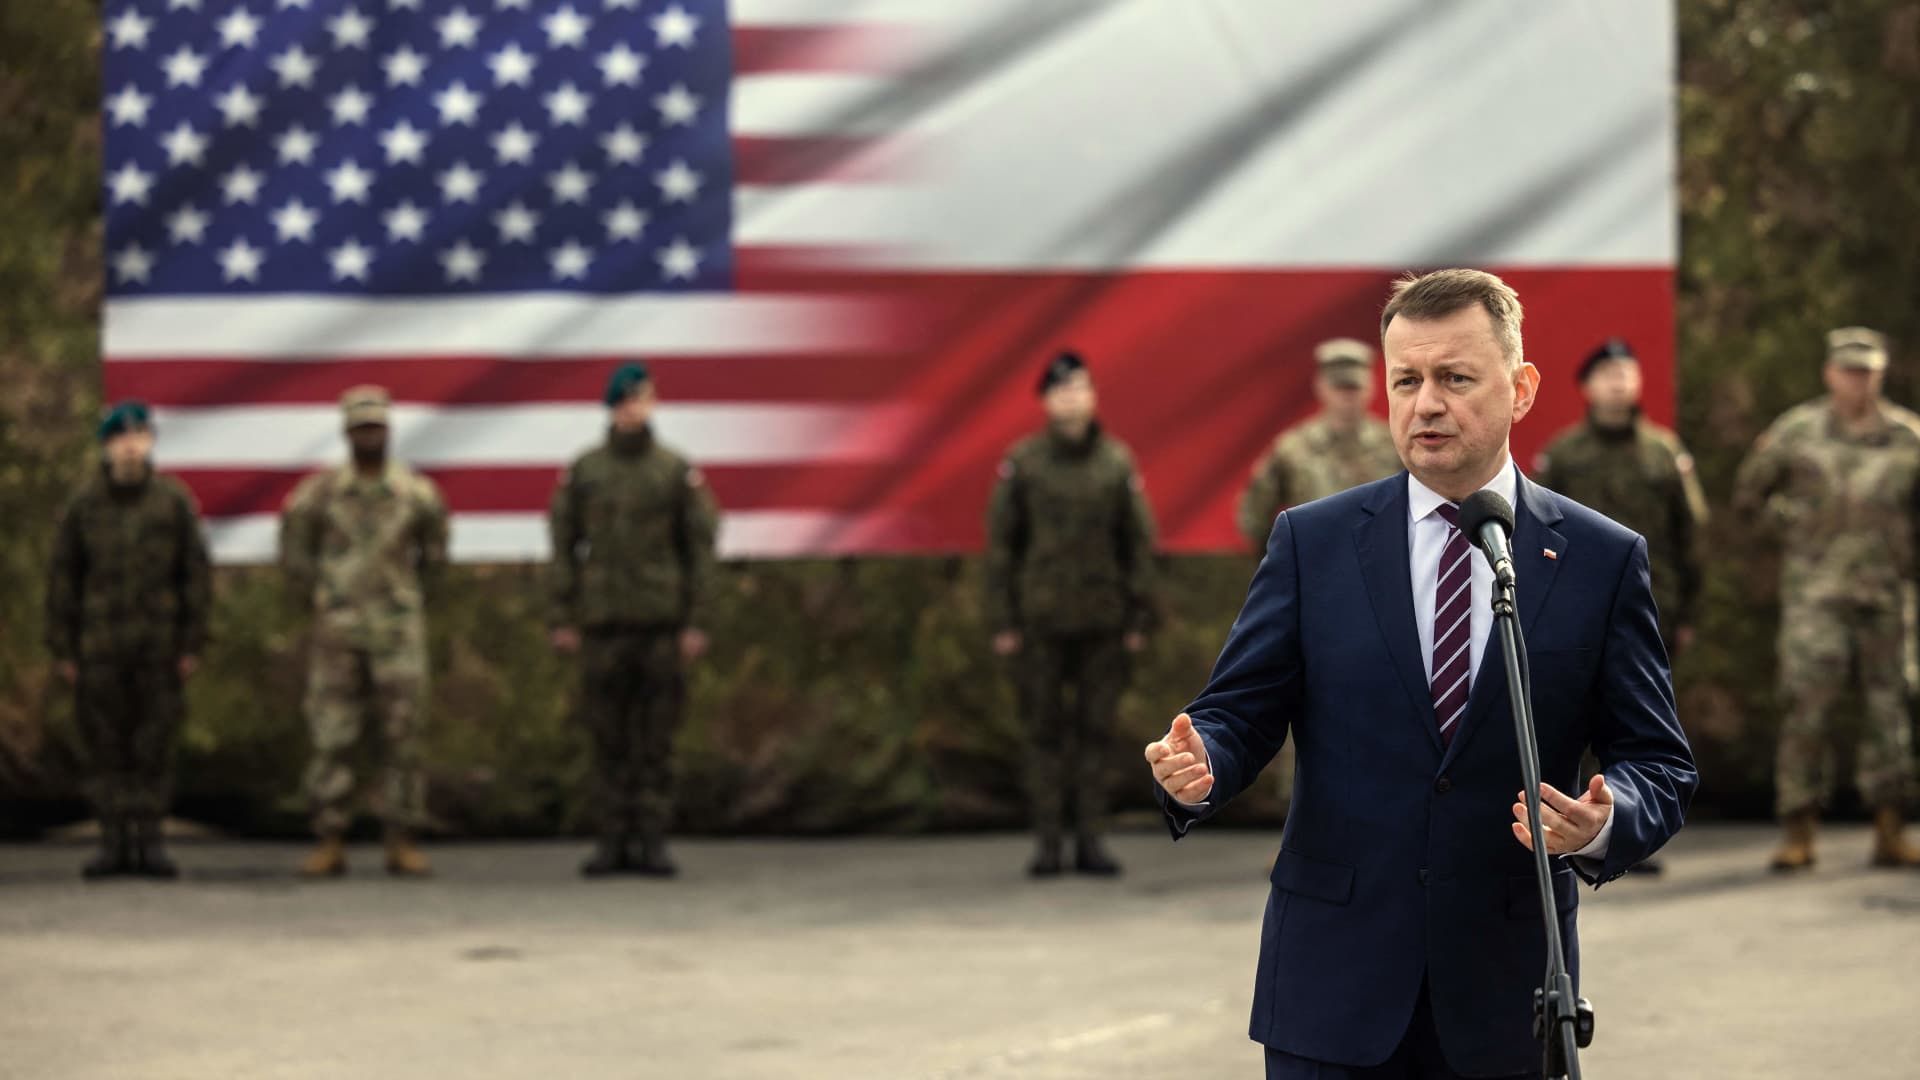 Polish deputy prime minister and minister of defence Mariusz Blaszczak speaks during the inauguration ceremony of the permanent US Army Garrison Poland, at Camp Kosciuszko in Poznan, on March 21, 2023. 